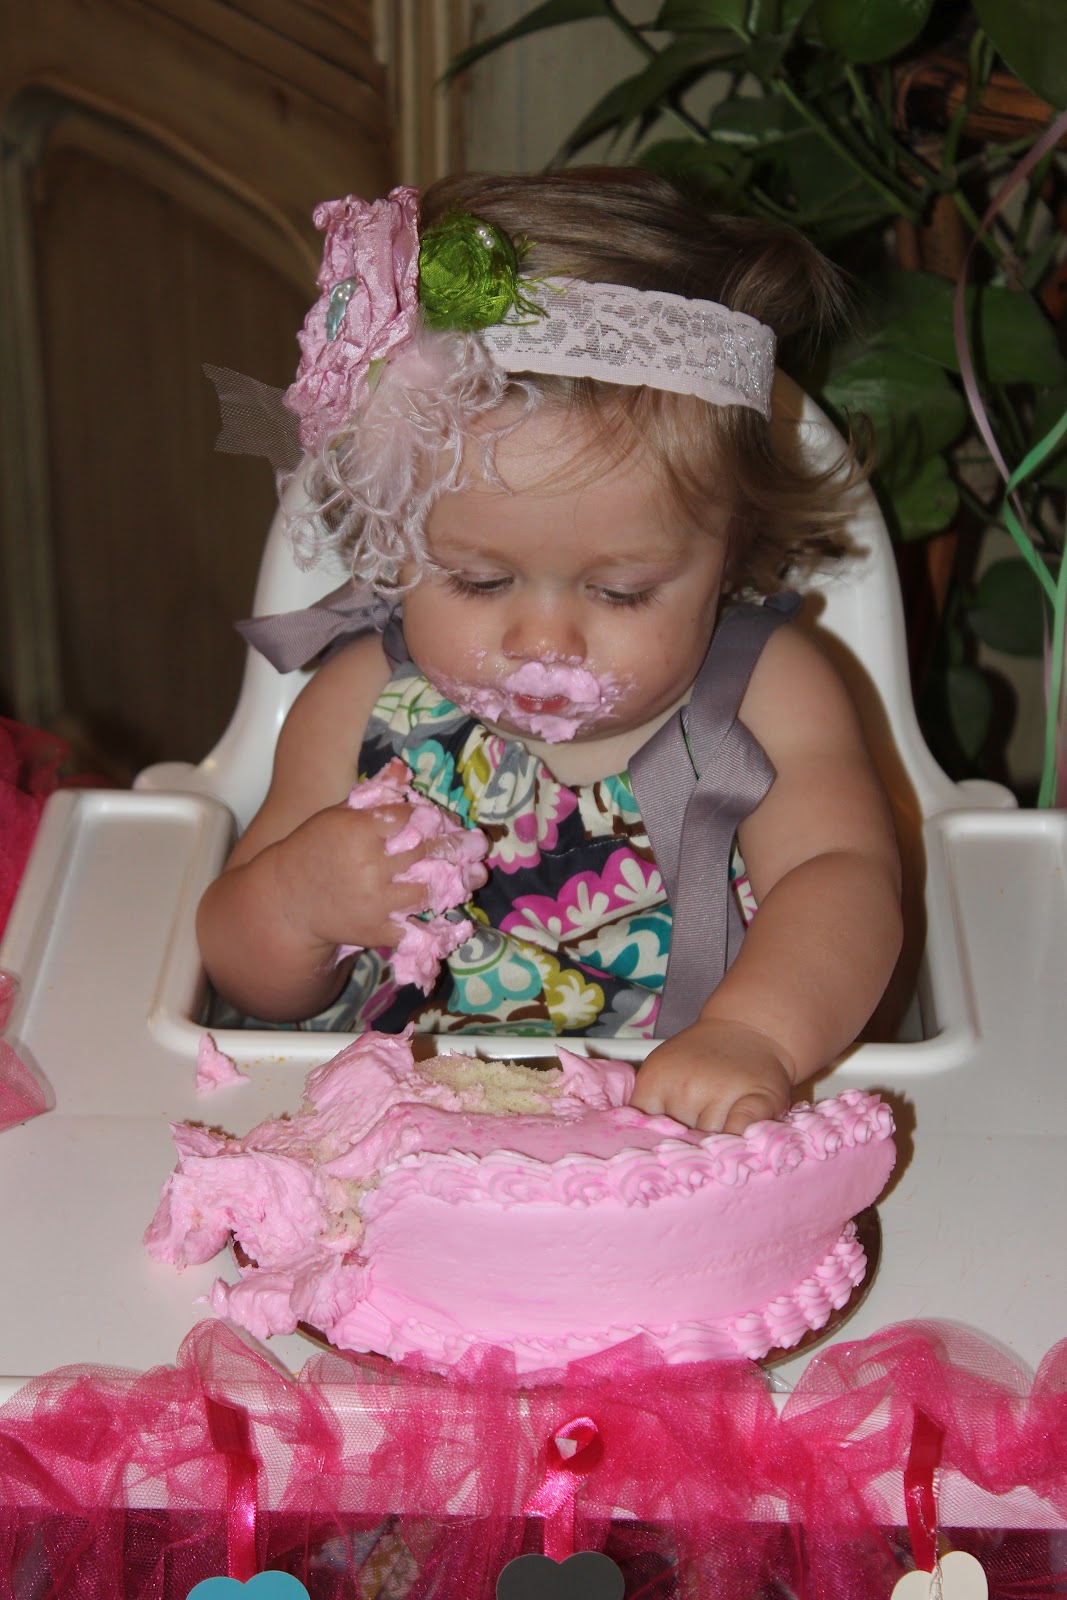 Patterson Party of Five: Paisley's Birthday Party